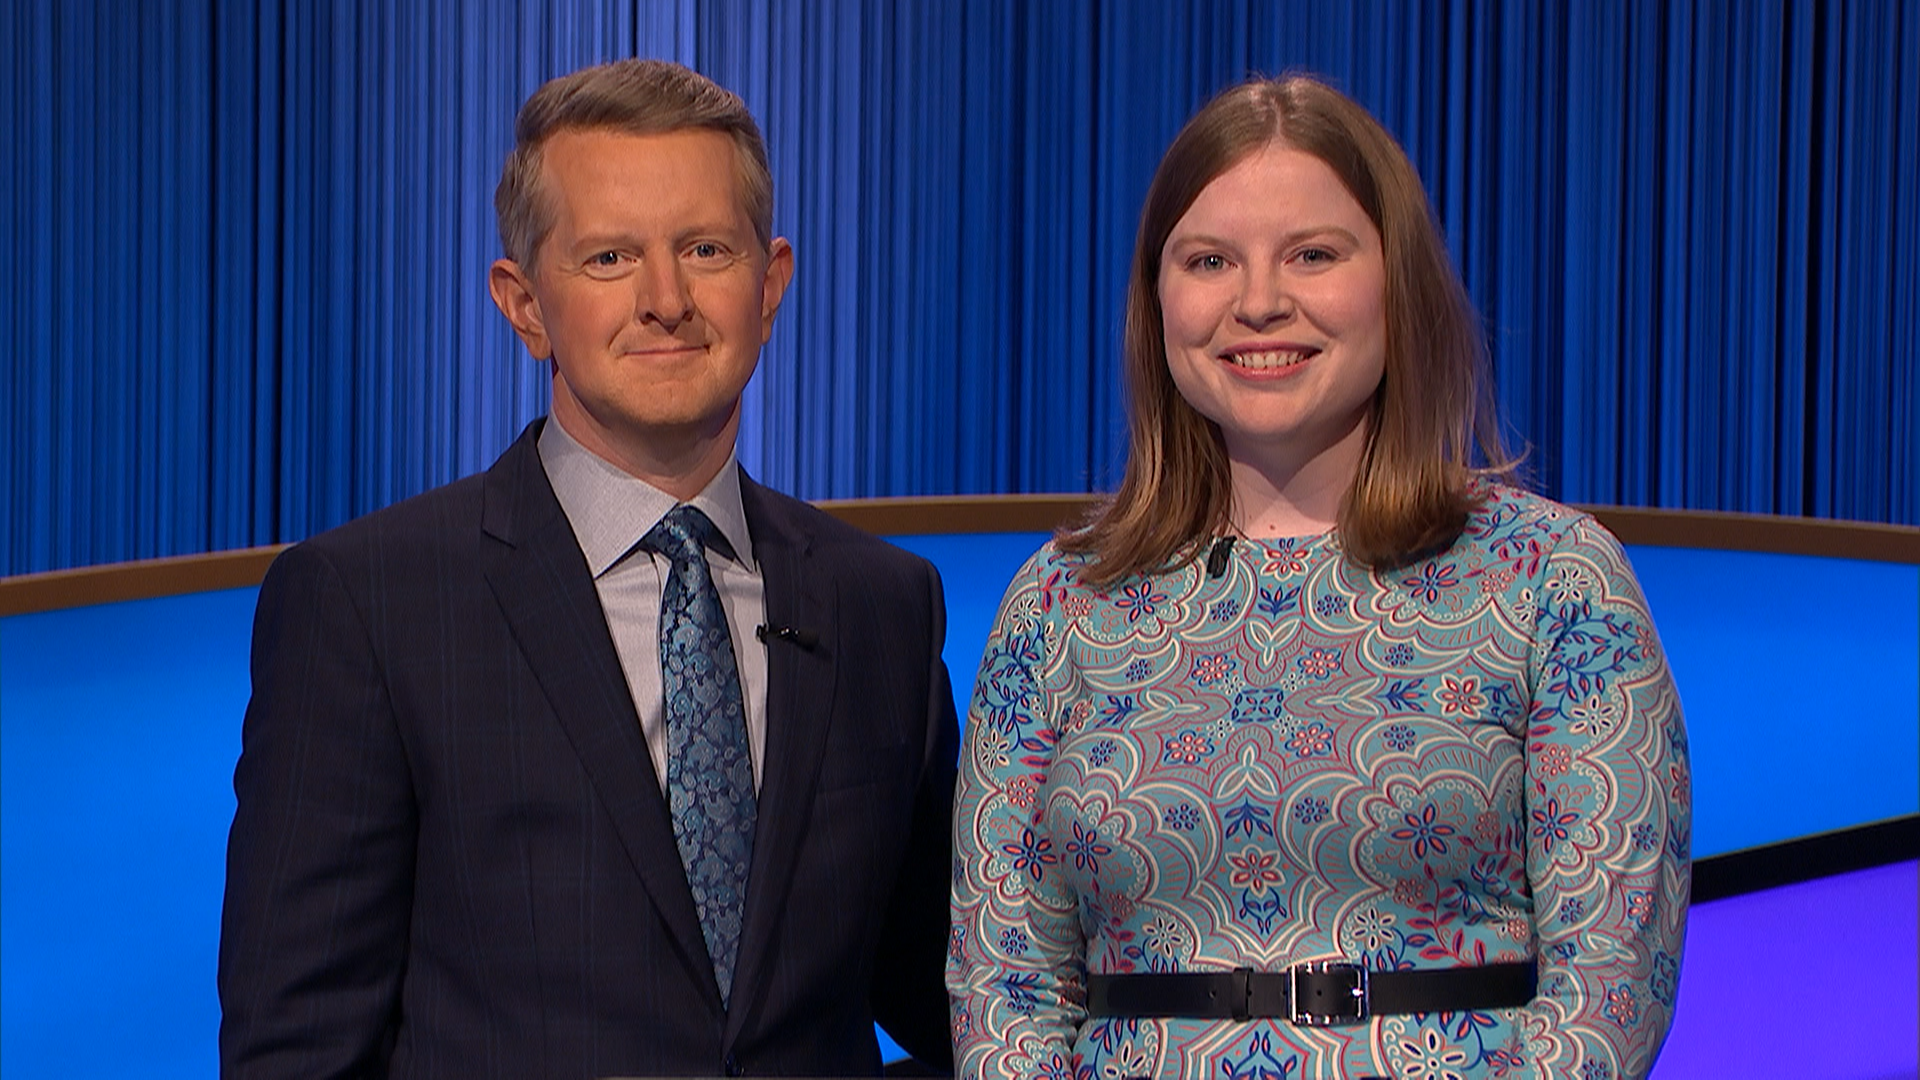 Who's on "Jeopardy!" today, June 4? Purdue archivist Adriana Harmeyer looks to win 5th game